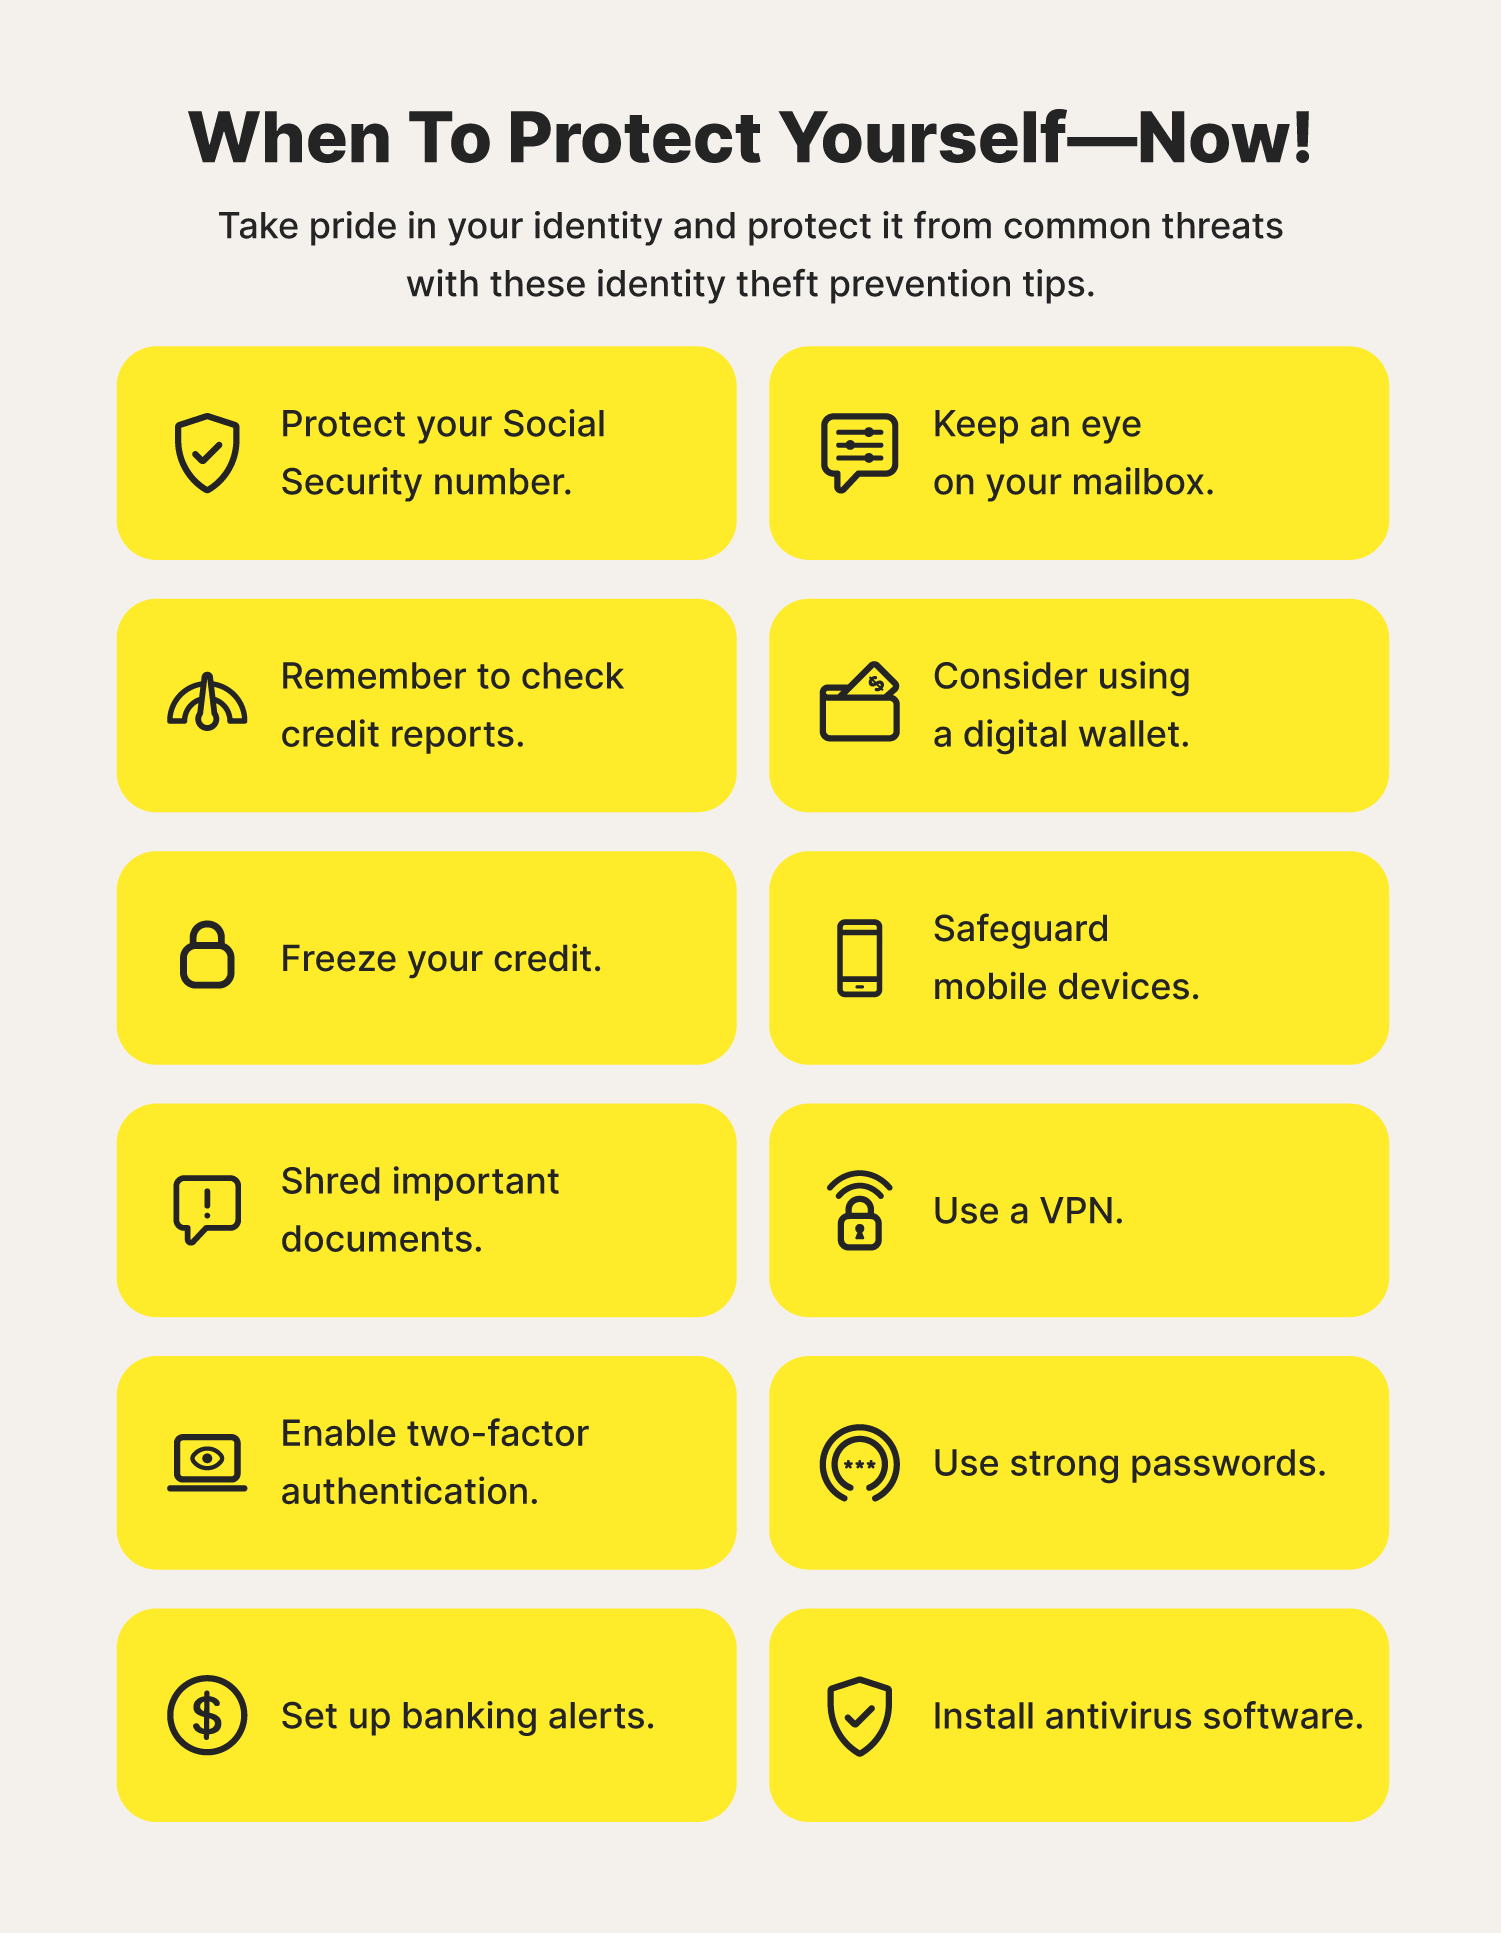 Twelve illustrations accompany the identity theft prevention tips that you can use as ways to avoid identity theft. 